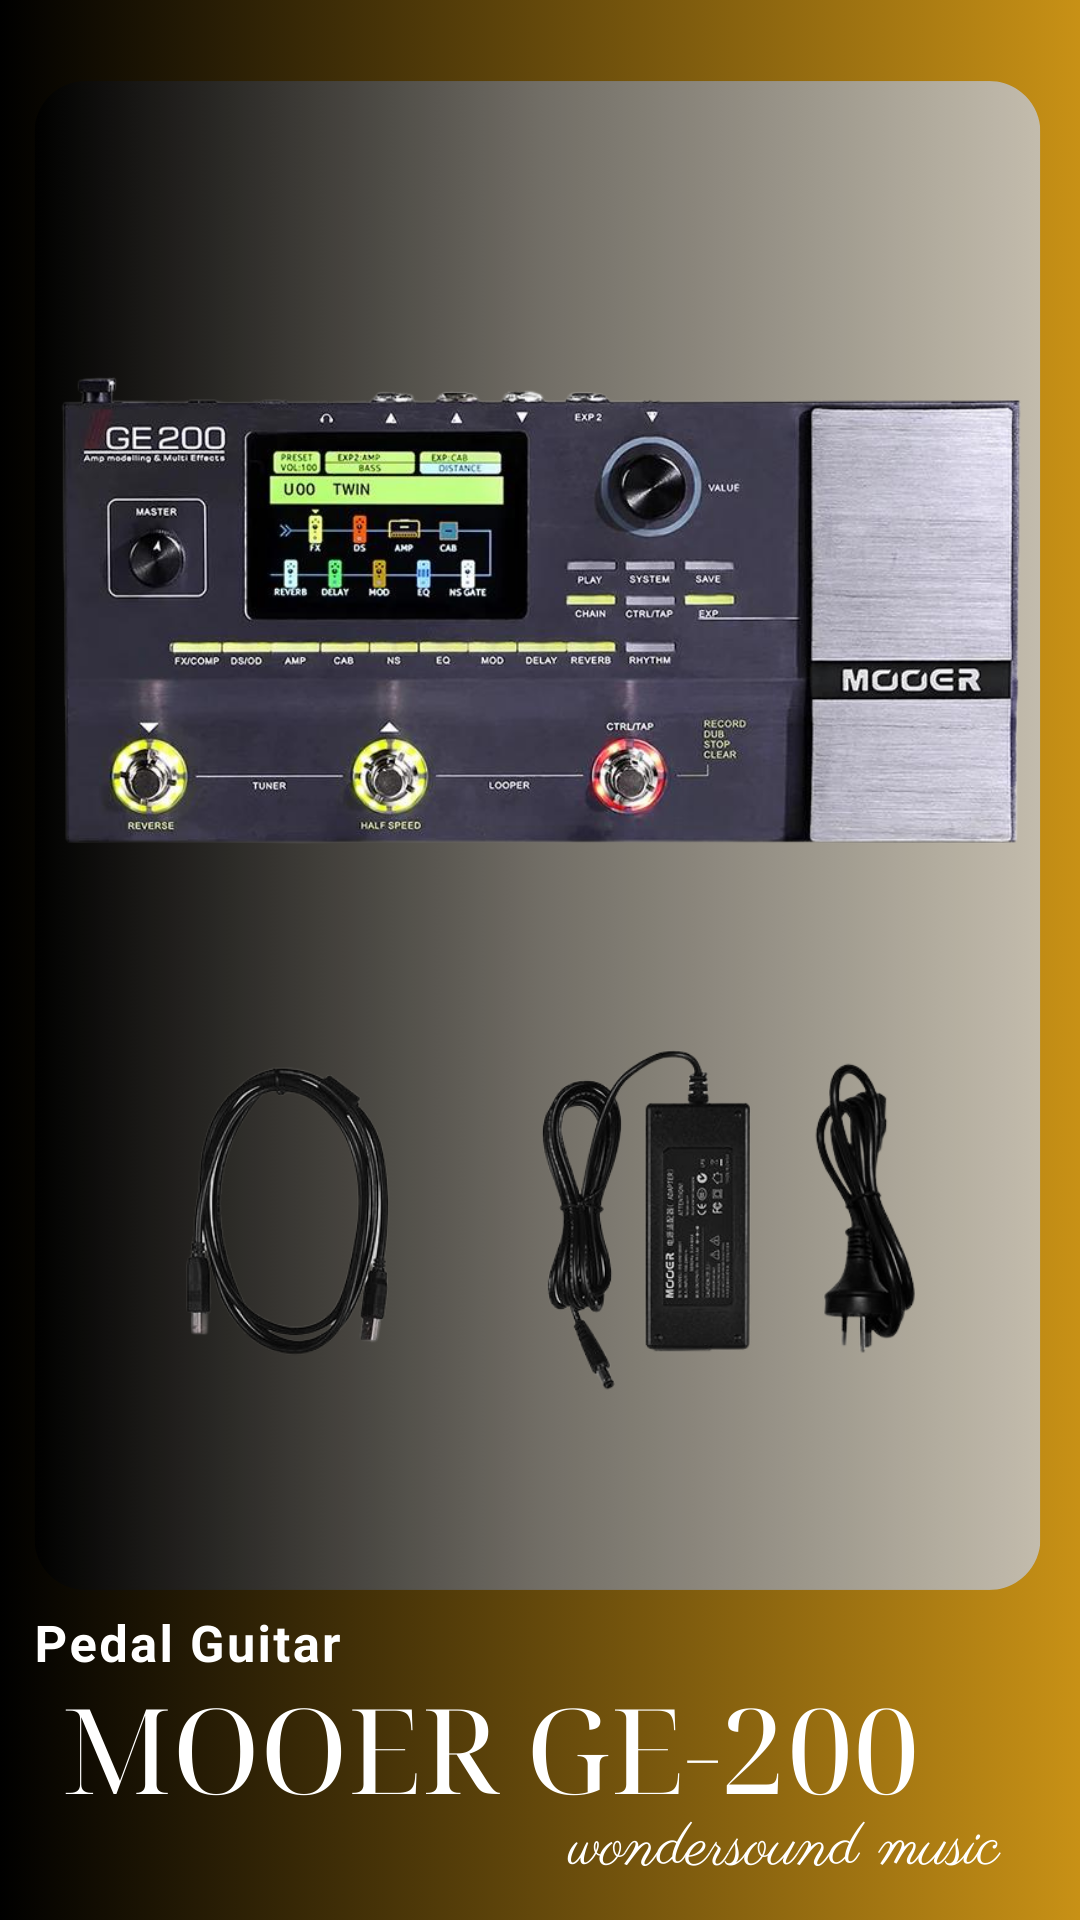  PEDAL GUITAR ELECTRIC (Multi Effects) MOOER GE-200 